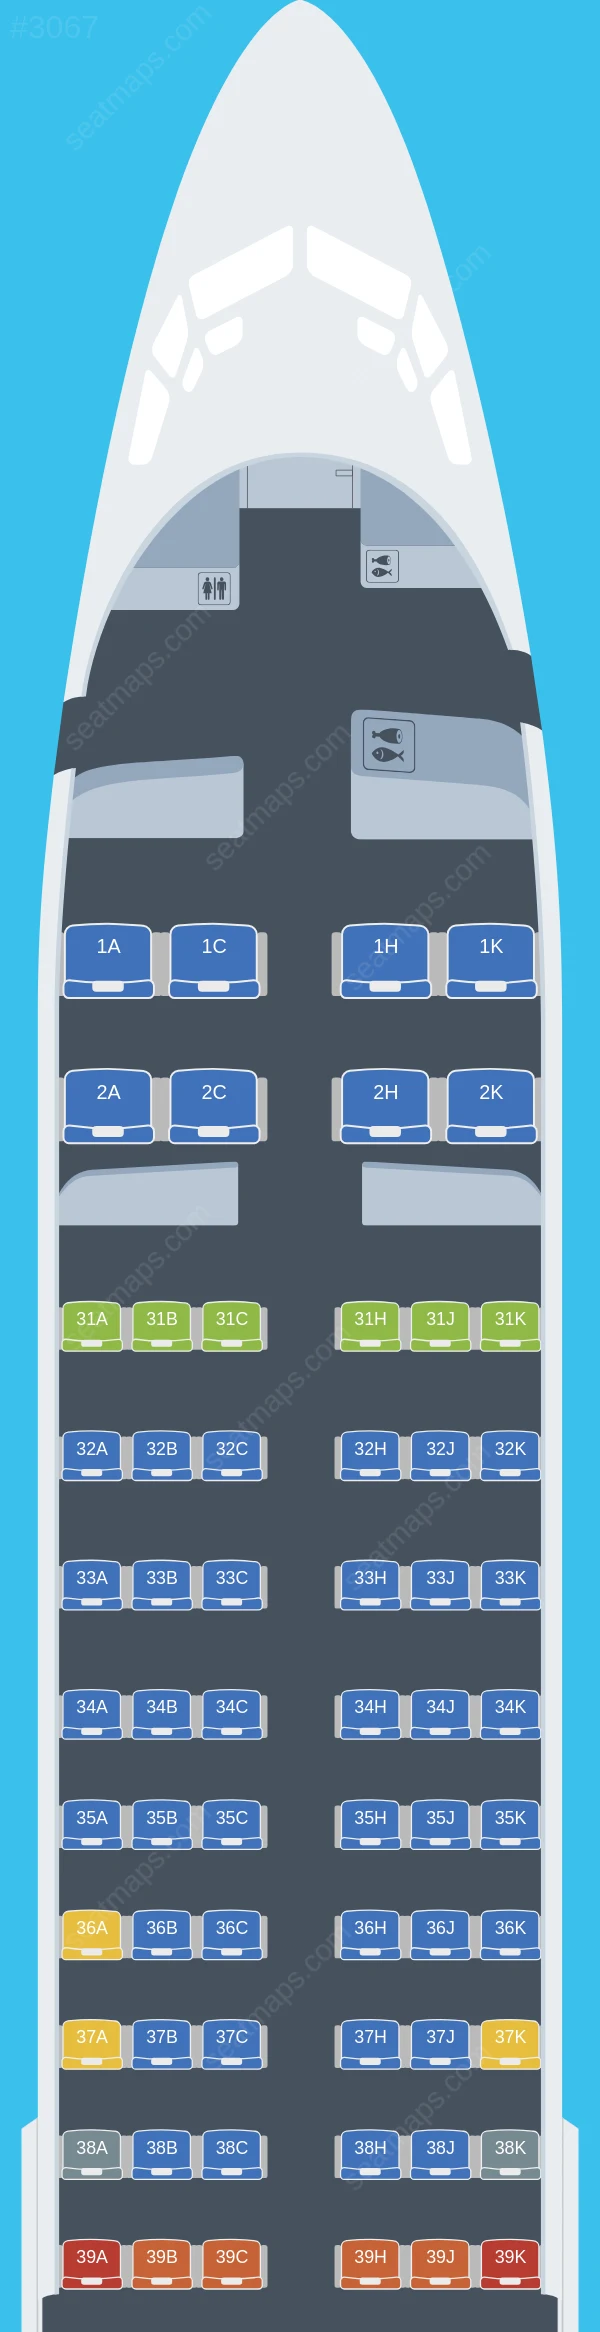 China Southern Boeing 737-800 V.2 seatmap preview